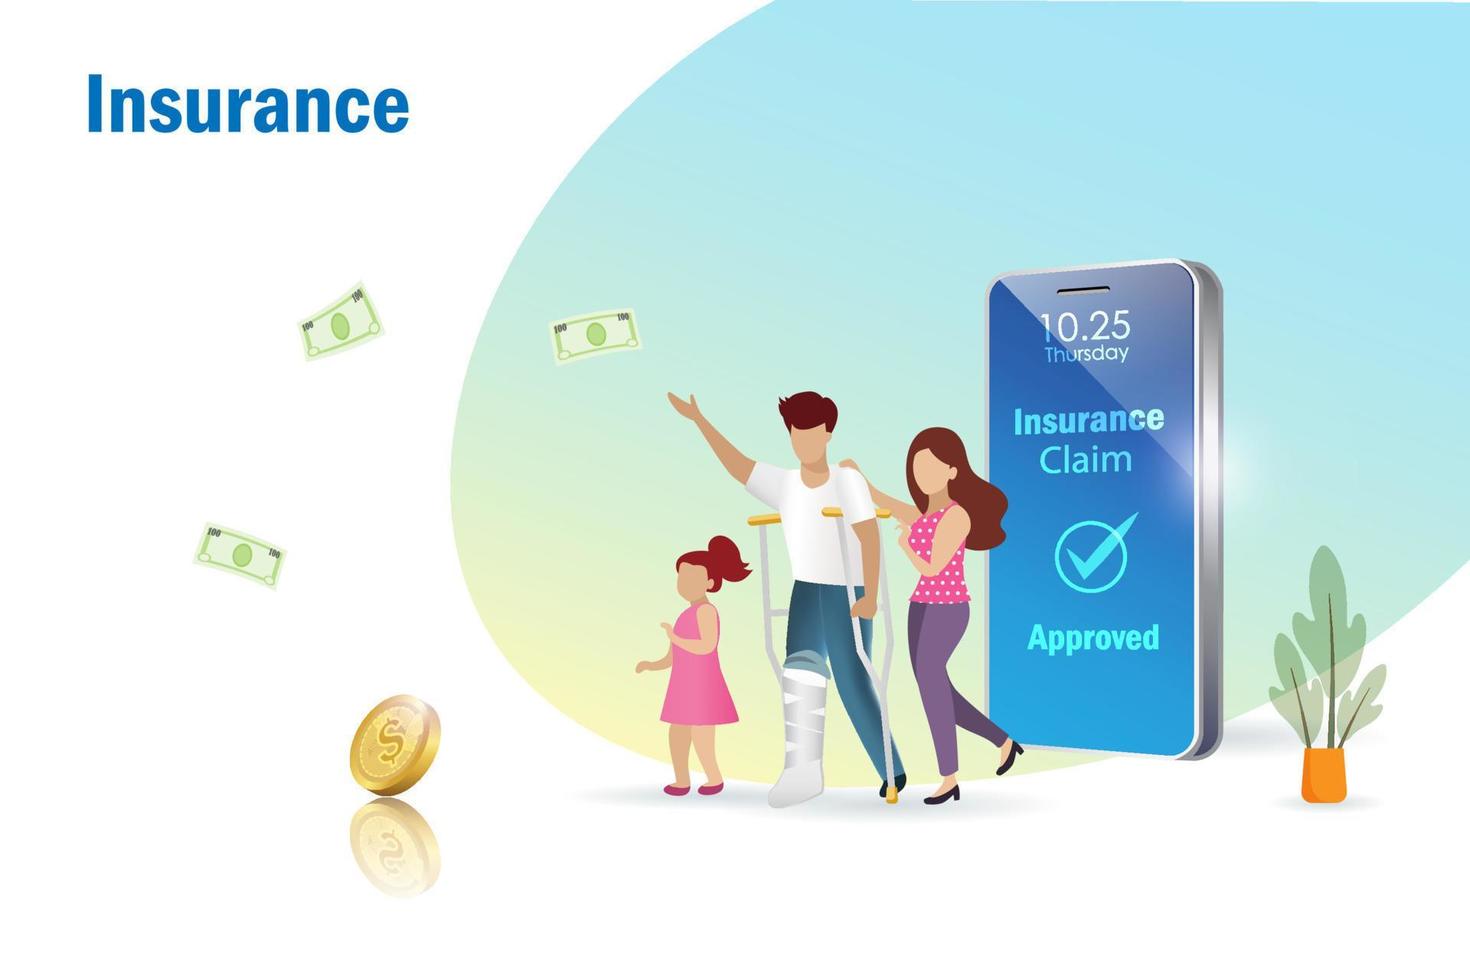 Health, accident insurance claim approved on smartphone. Happy broken leg man and family with money from insurance claim. Life insurance protect family health and life. vector